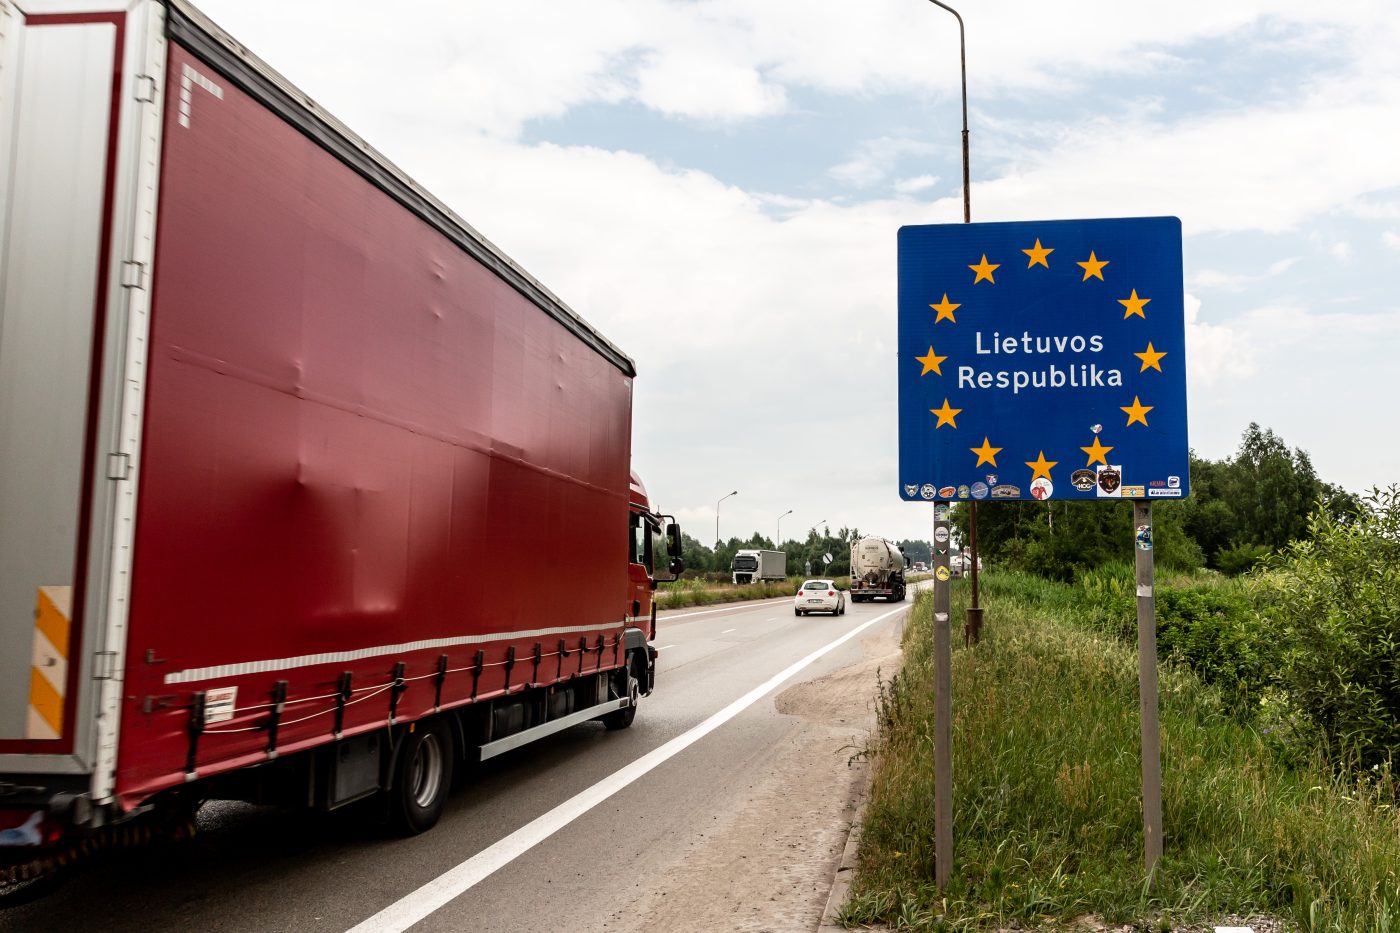 Photo: A lorry with goods passes the Lithuanian border sign to enter Lithuania on June 29, 2022 at Polish-Lituanian border on the busy E67 road. The Polish border with Lithuania is situated between Kaliningrad oblast (part of Russia) and Belarus and stretches 100 kilometers. The Area is called Suwalki Gap and is the only connection between Baltic States and the rest of the NATO and European Union. After Lithuania refused to transport sanctioned goods via rail from Russia's mainland to Kaliningrad, Vladimir Putin, Russian president, threatened Lithuania with serious consequences. Both NATO and European Union worry that Suwalki Gap, a relatively narrow corridor with Baltic States can be attacked by Russia. Credit: Photo by Dominika Zarzycka/NurPhoto